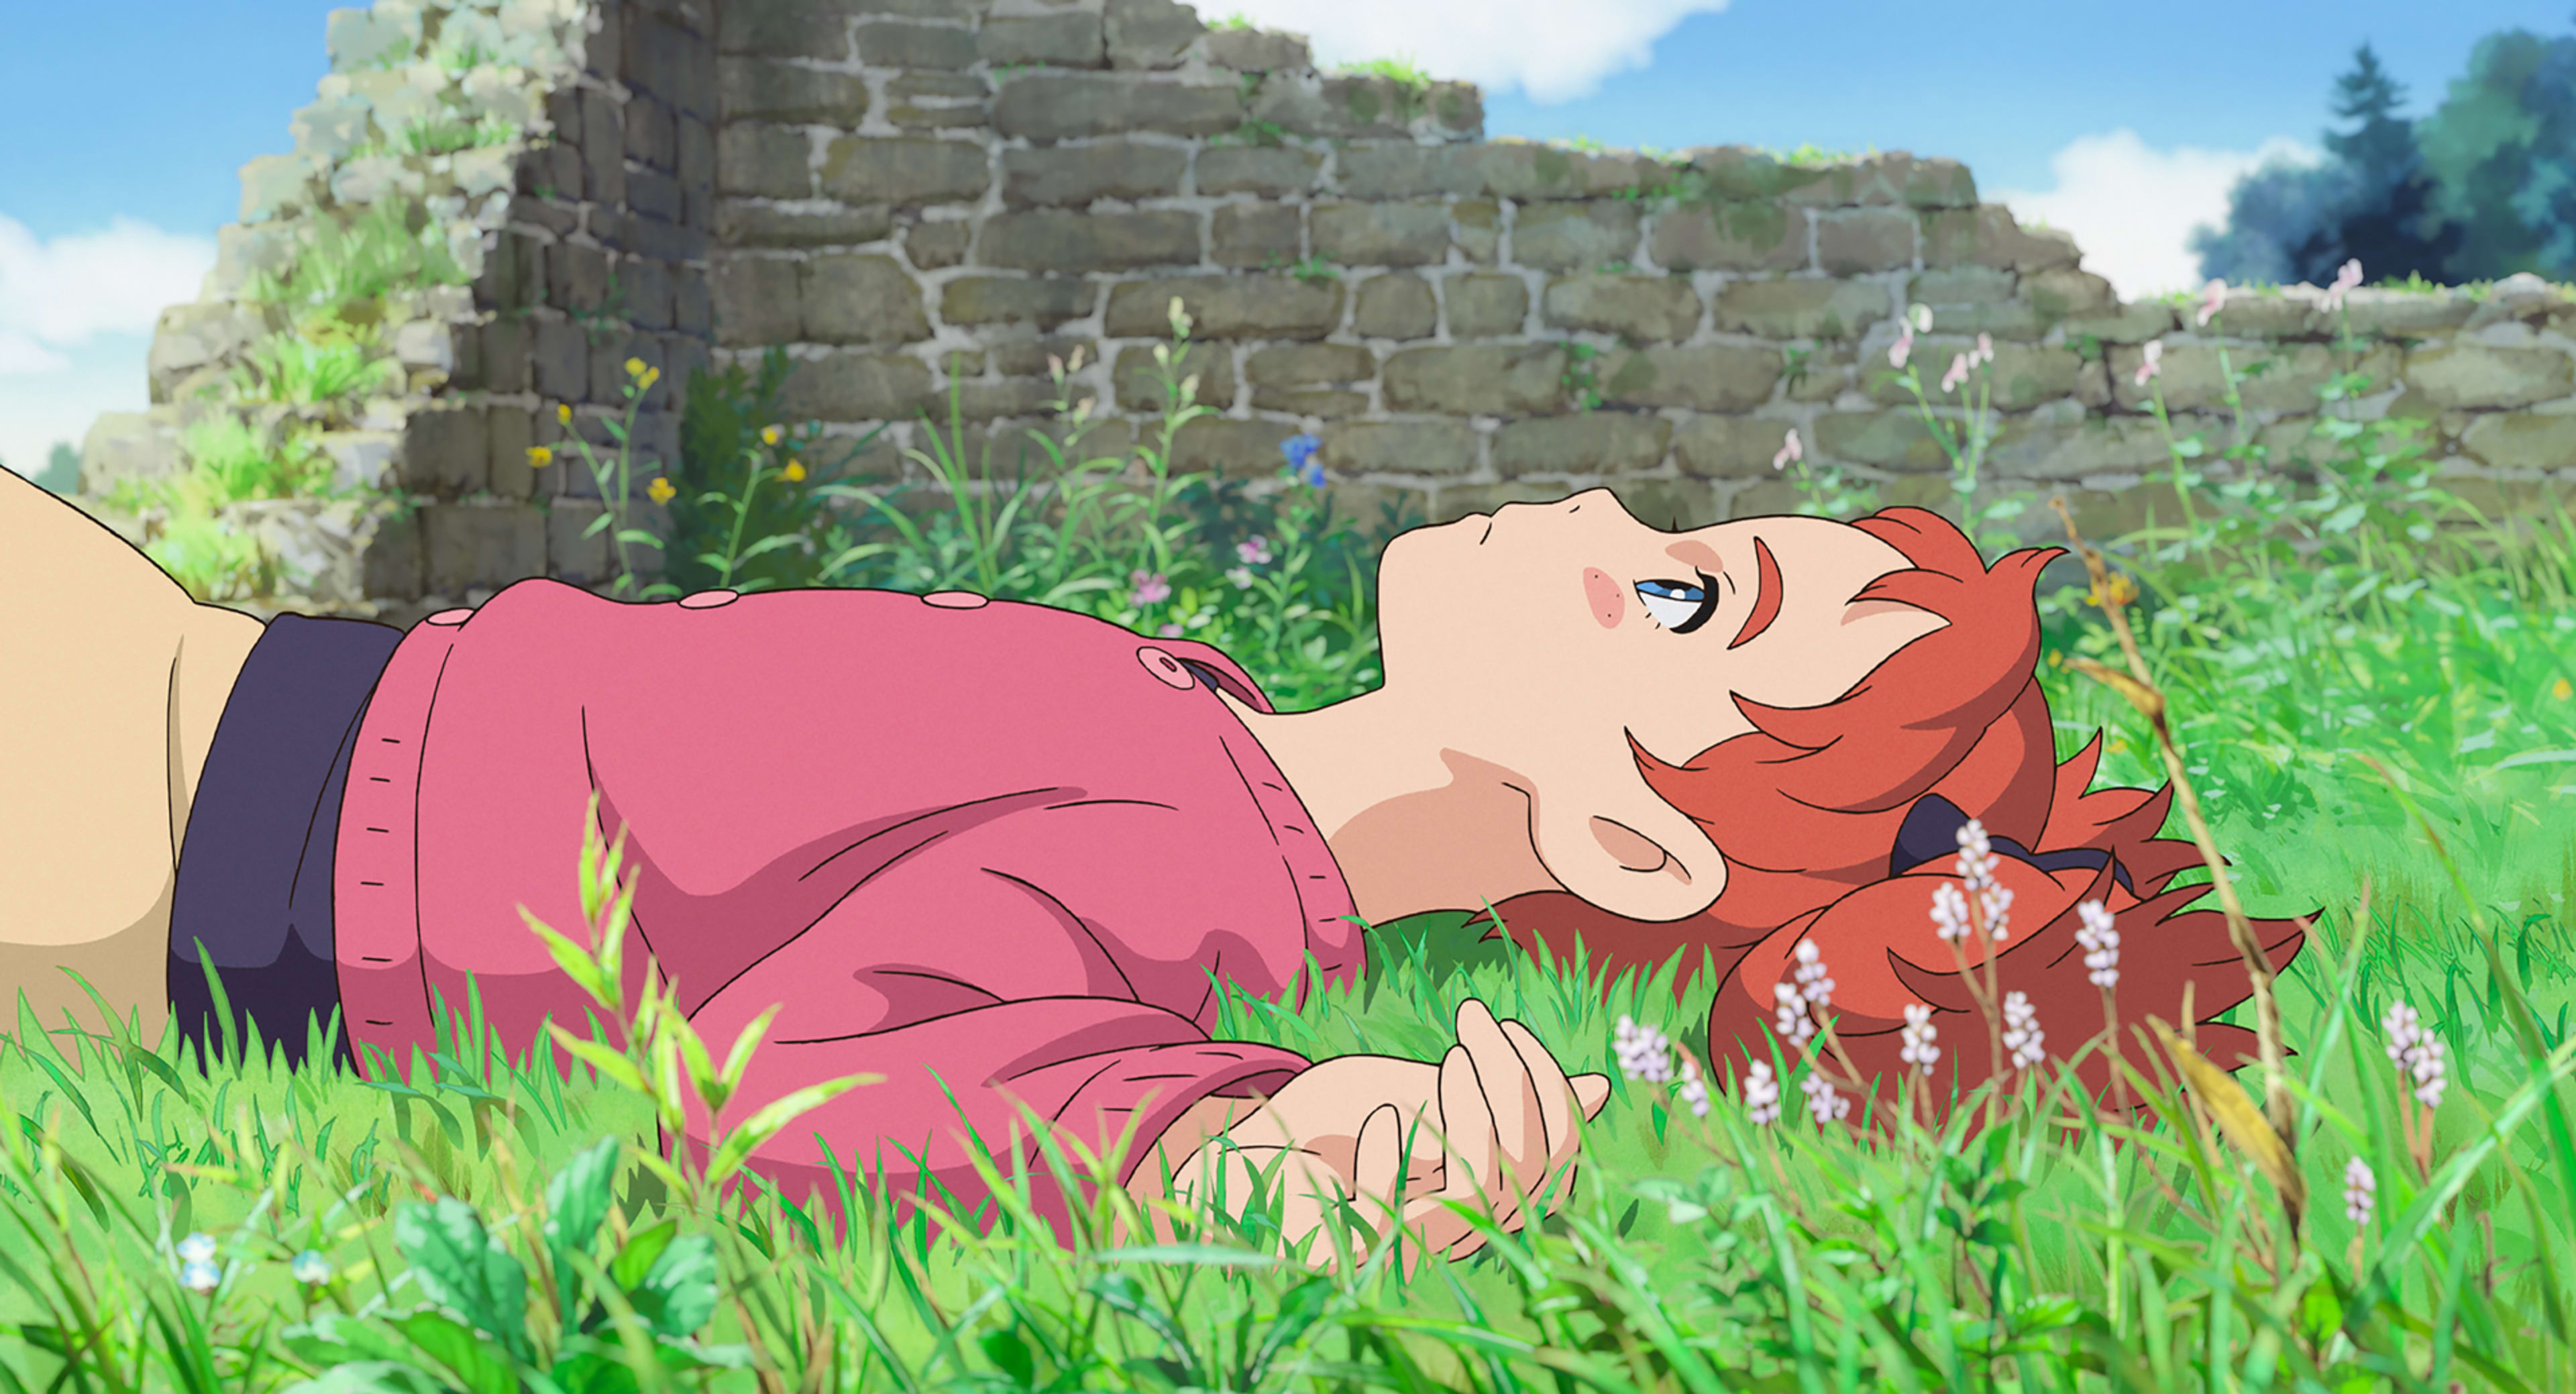 Studio Ghibli Alumni Step Out With Debut Feature “Mary And The Witch’s Flower”